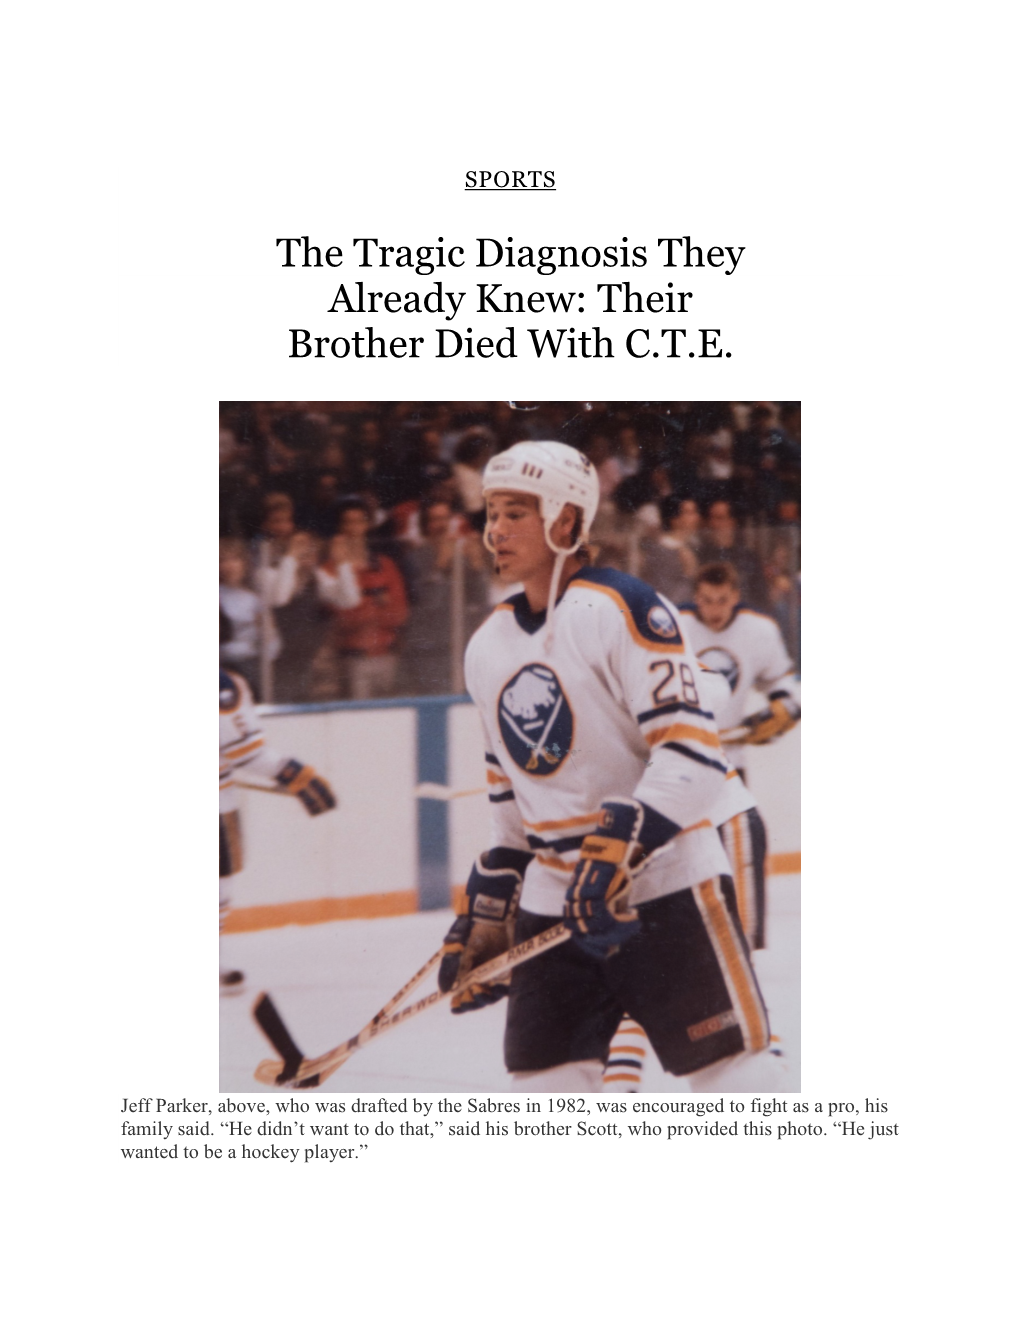 The Tragic Diagnosis They Already Knew: Their Brother Died with C.T.E